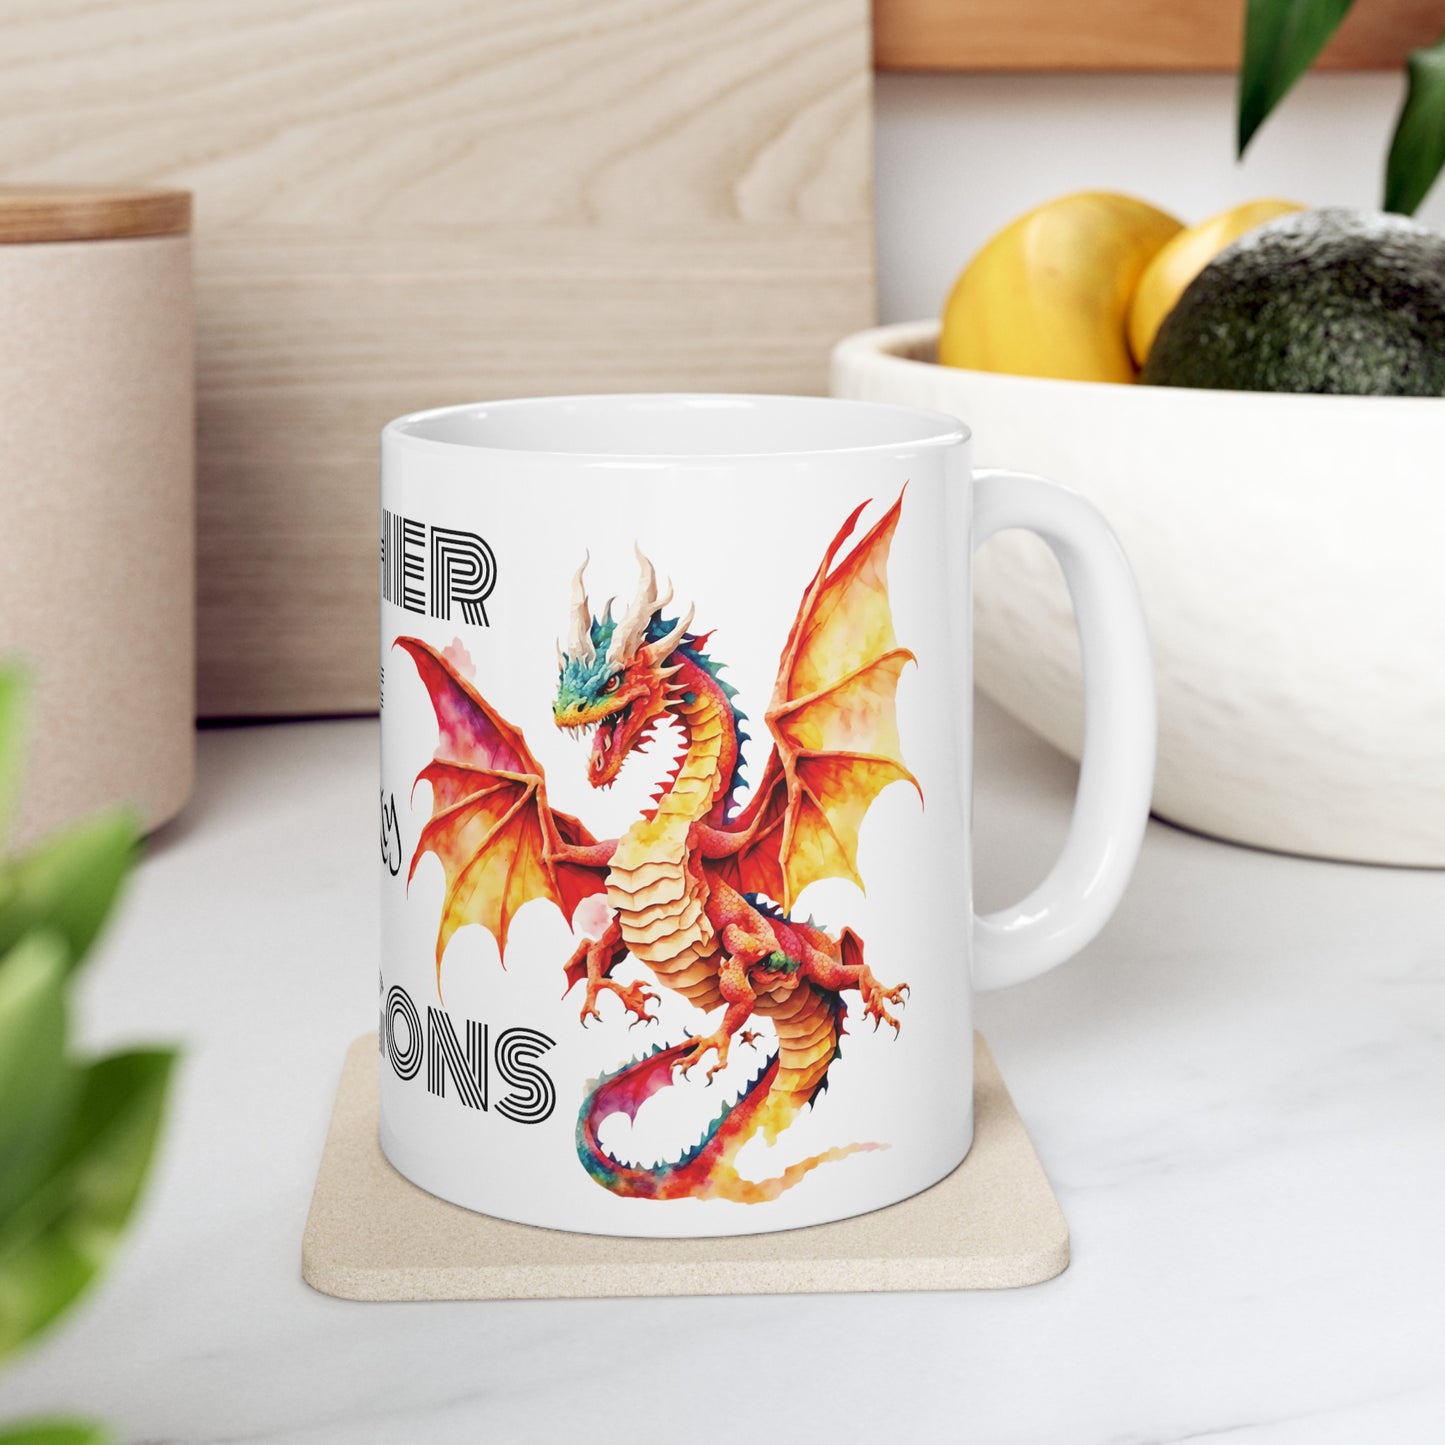 Mother Of 'naughty' Dragons Ceramic Mug (11oz) - Perfect Gift  Mothers Day